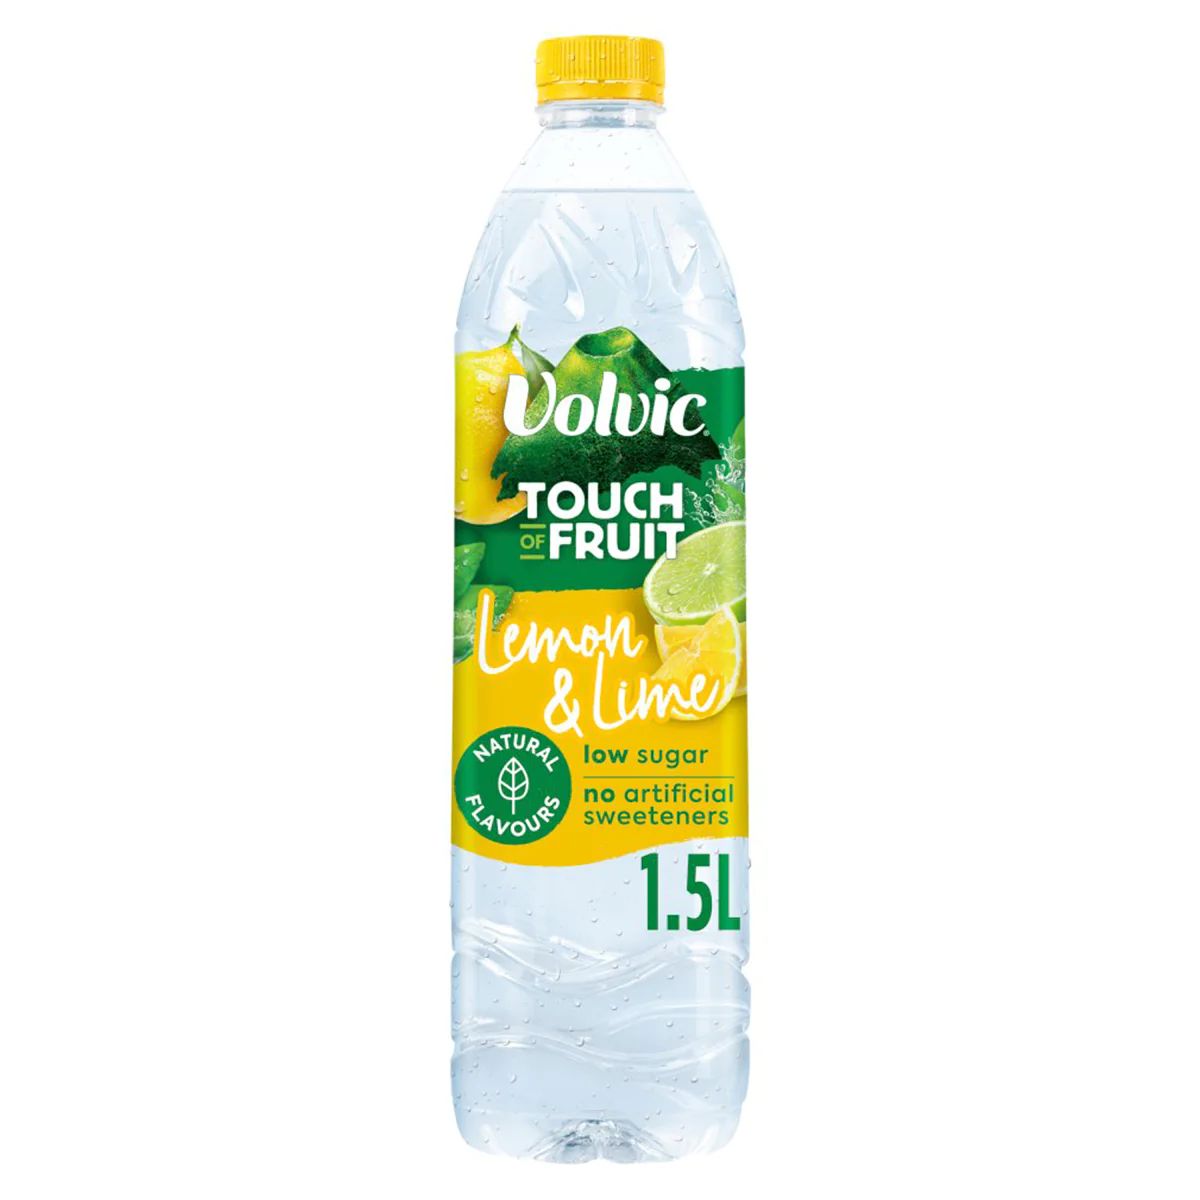 1.5L Volvic - Touch of Fruit Lemon & Lime Flavoured Water with low sugar and no artificial sweeteners.